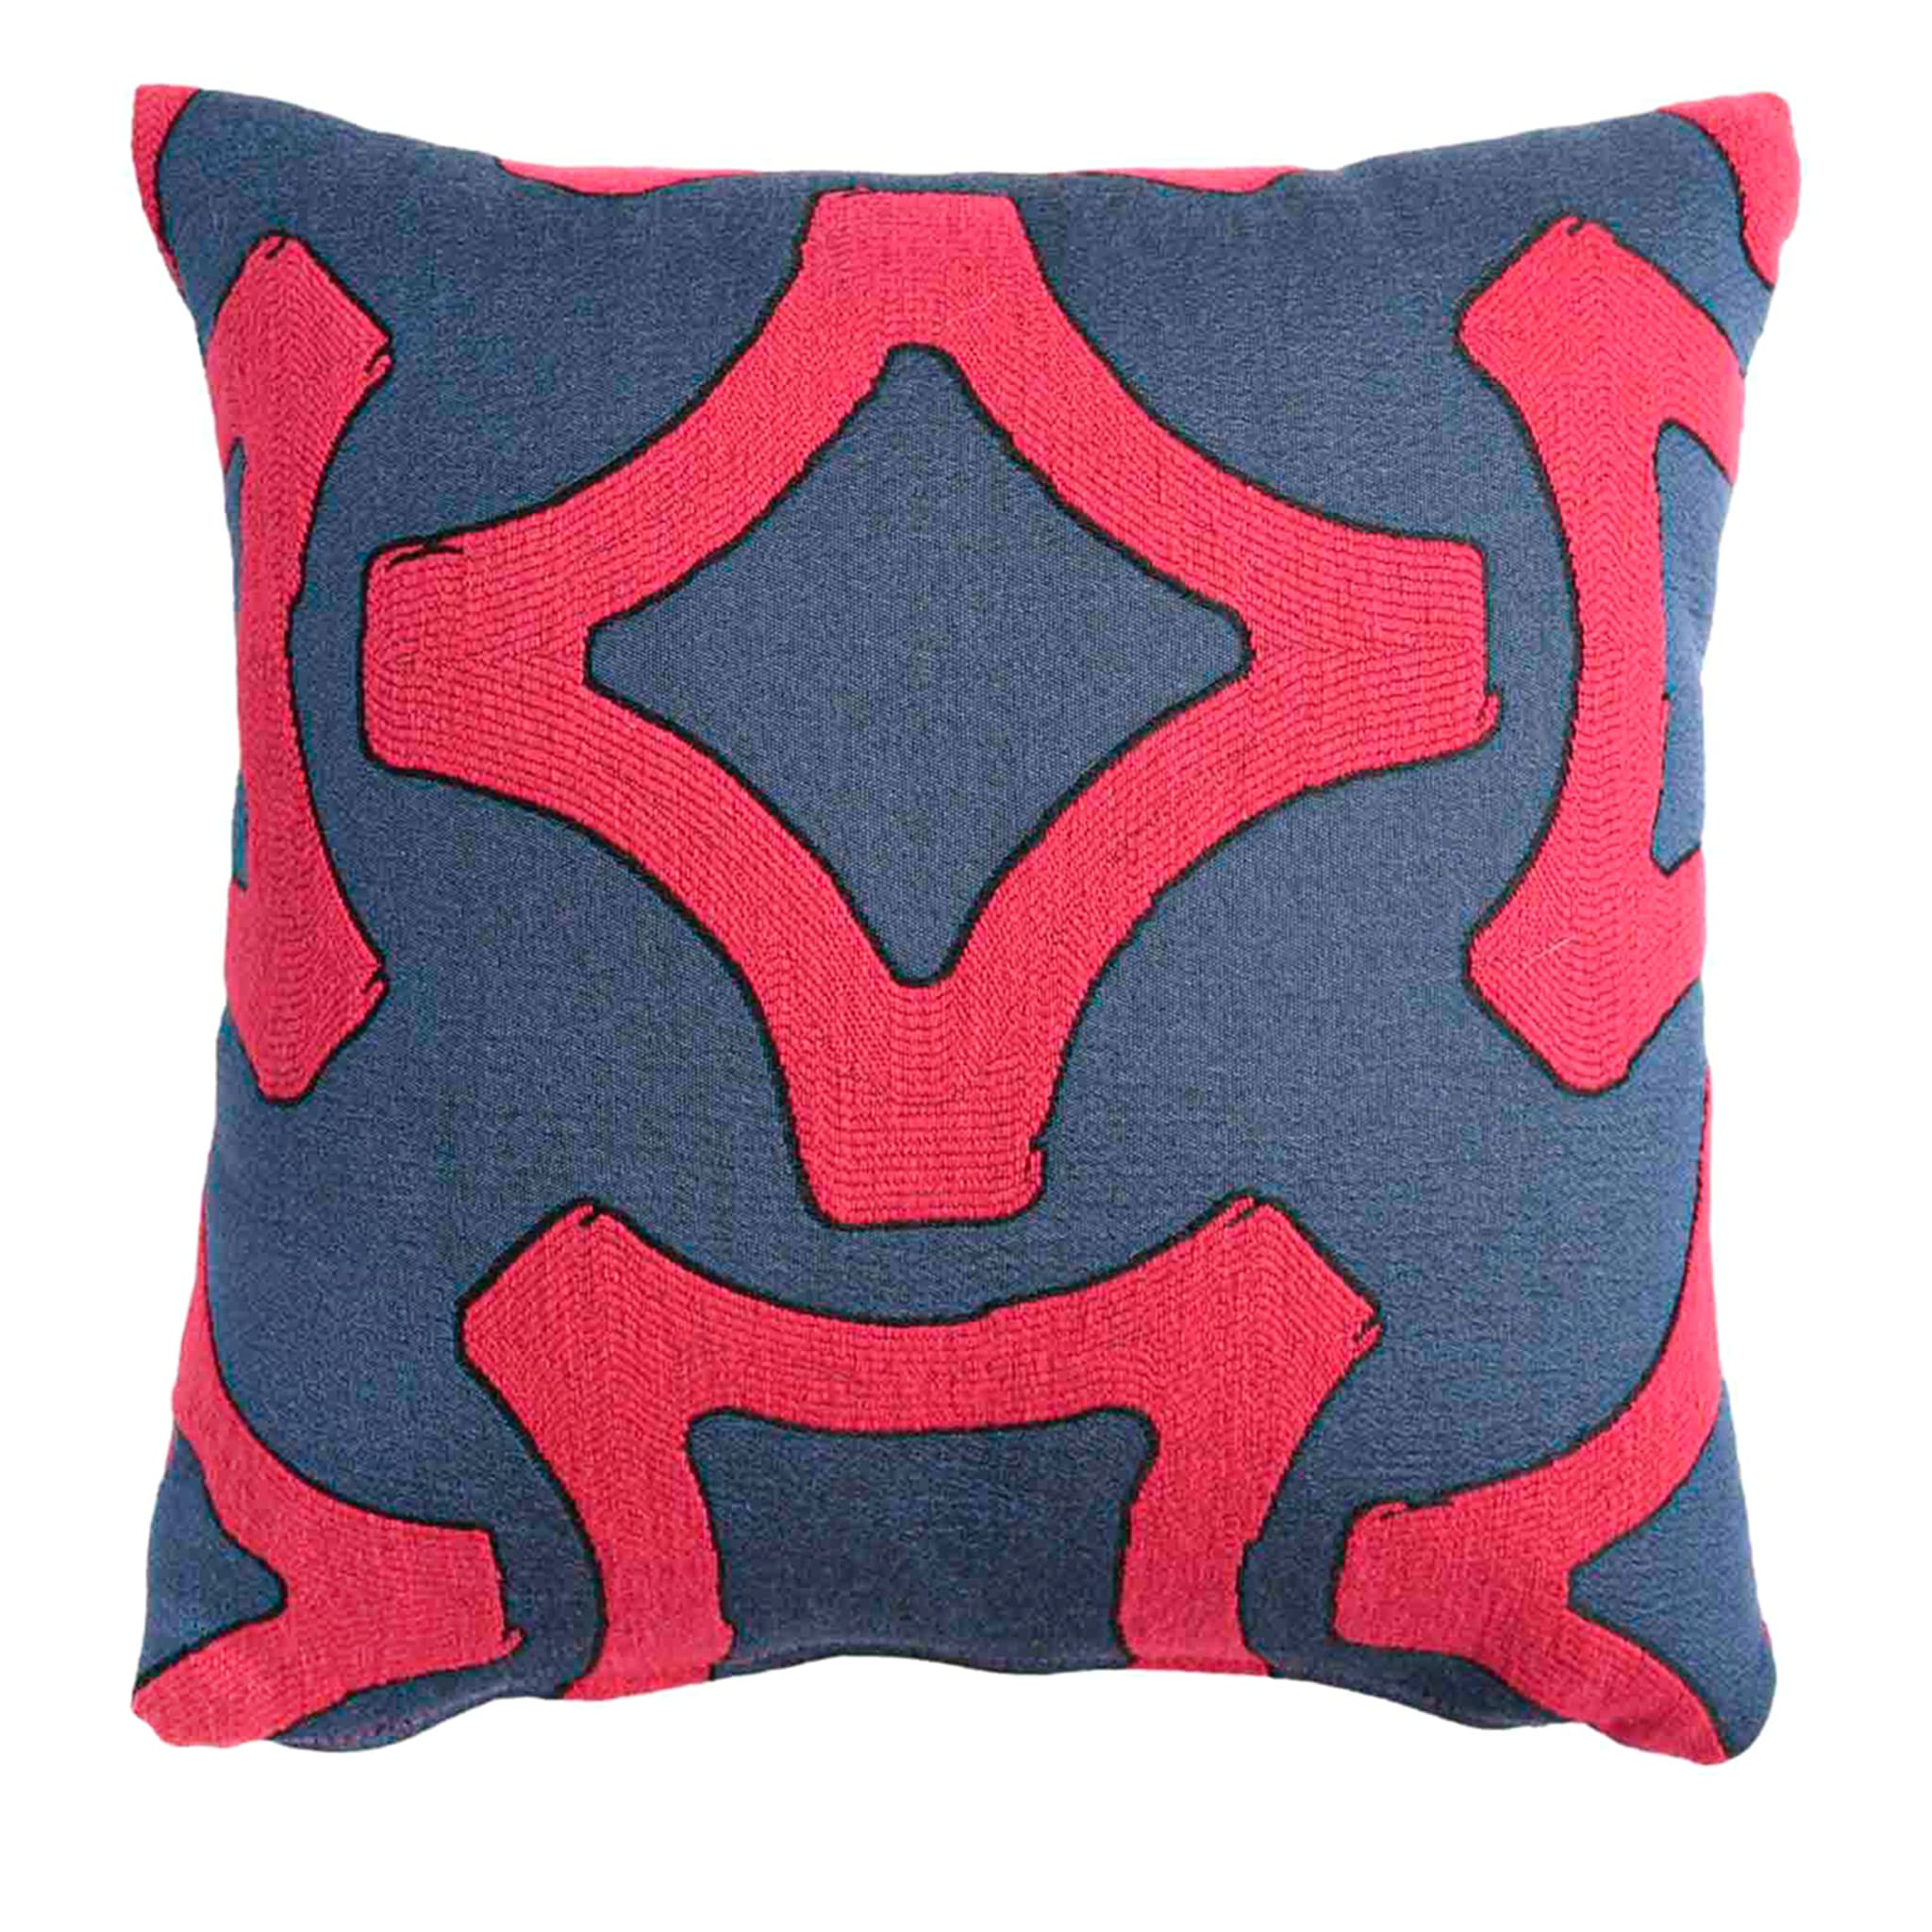 Carrè Patterned Blue and Fuchsia Square Cushion - Main view